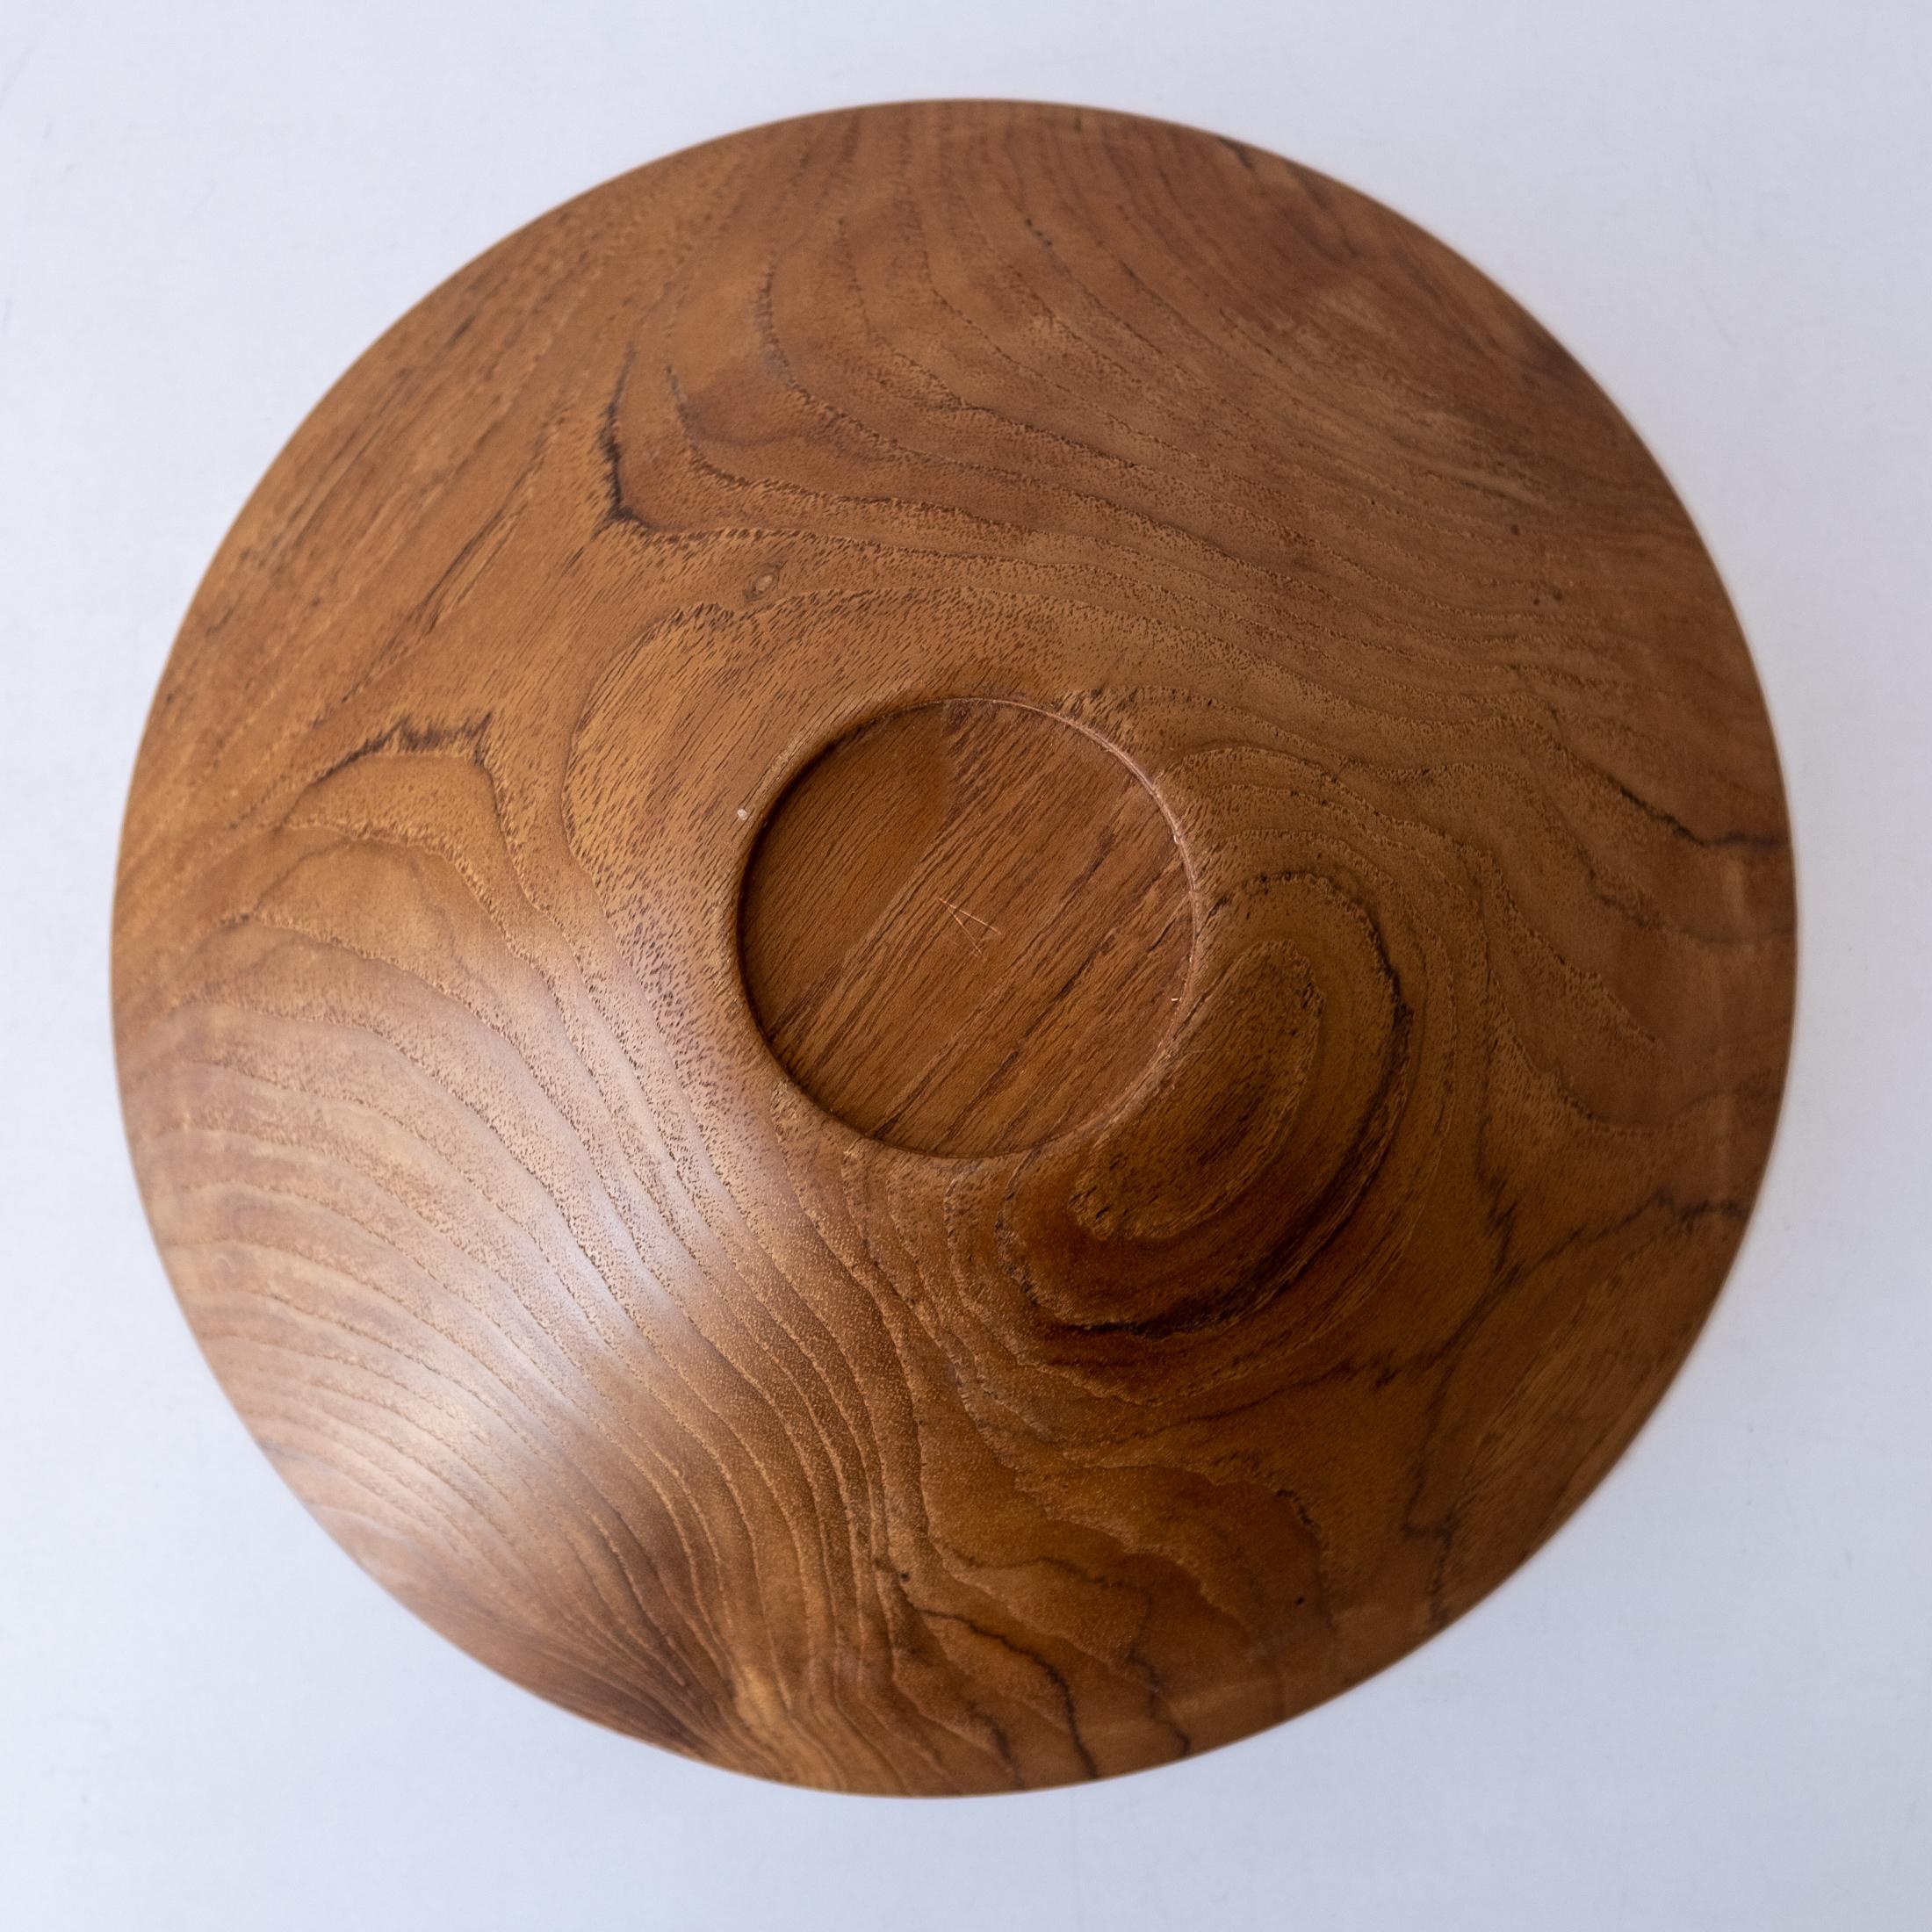 Mid-20th Century Shigemichi Aomine Modernist Japanese Wood Bowl for the National Craft Council For Sale